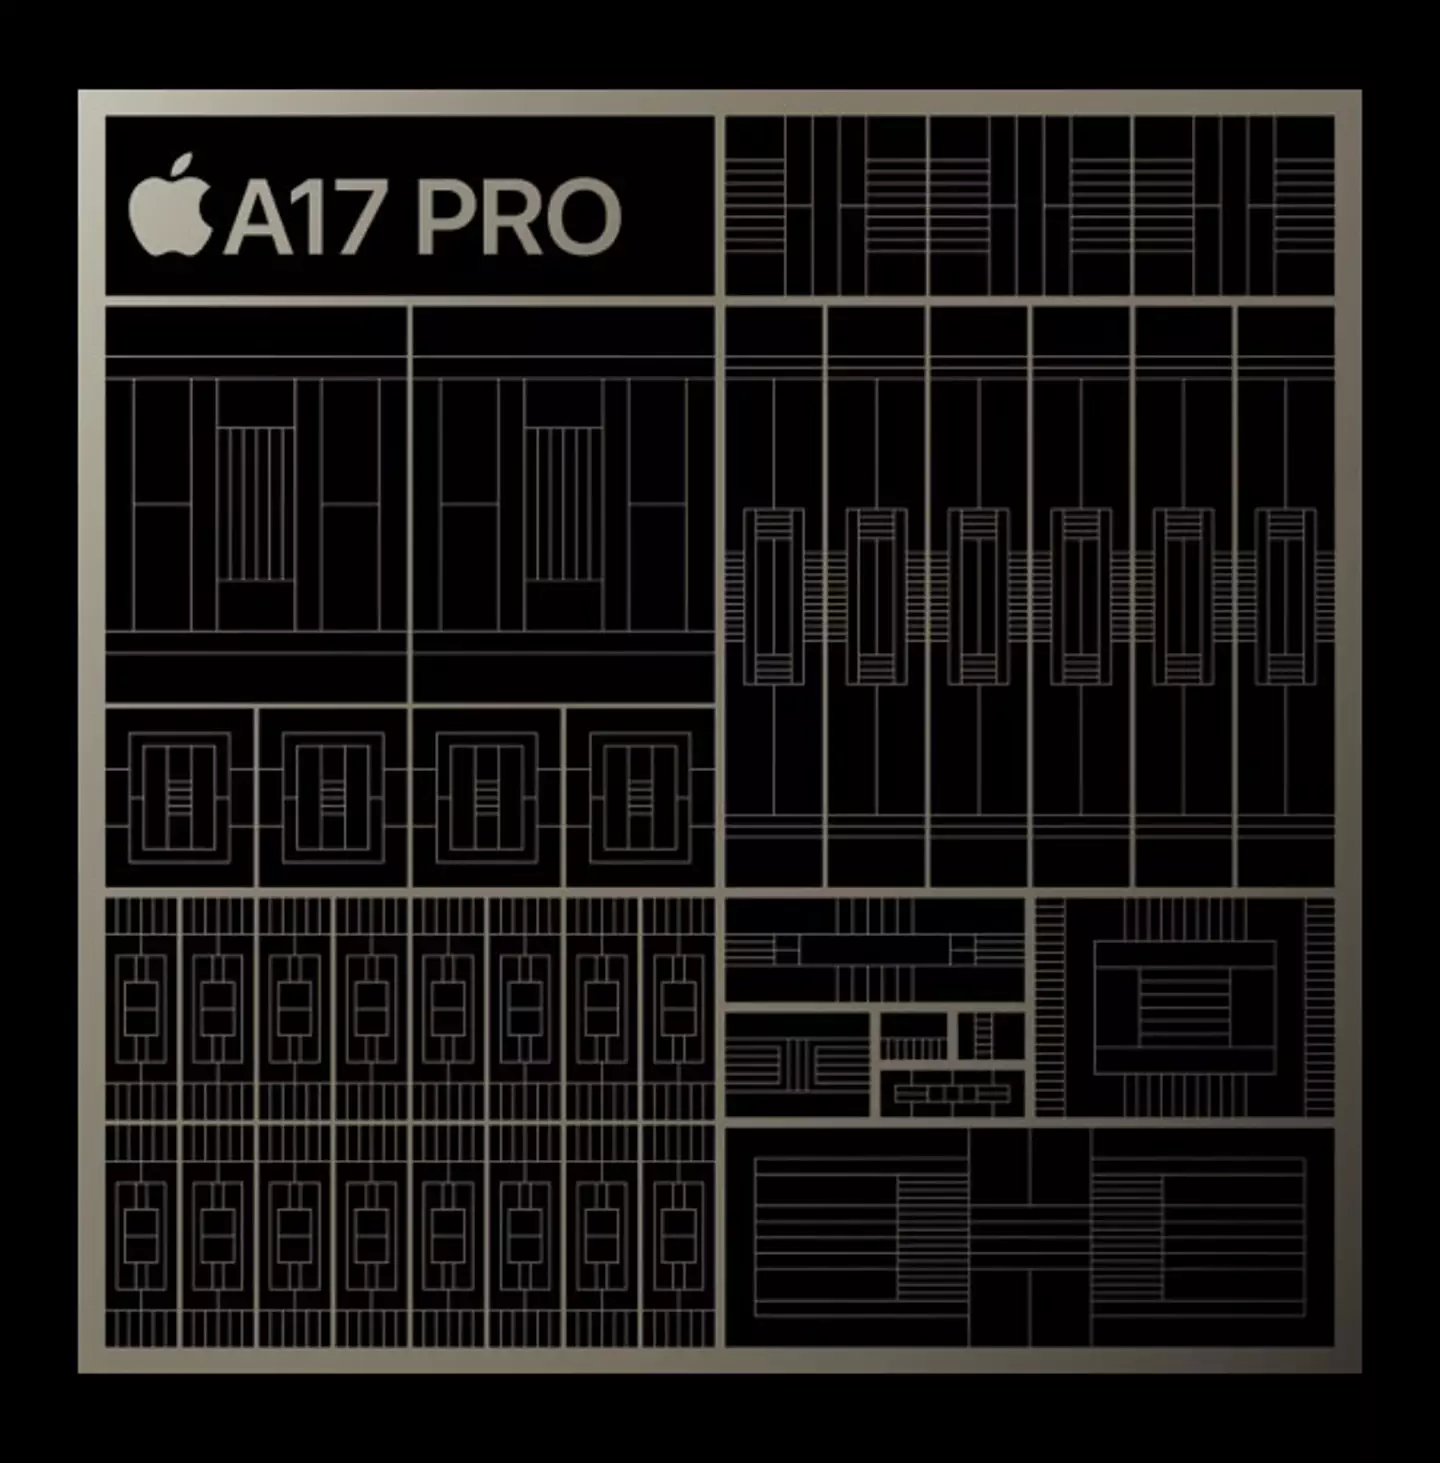 Apple's latest chip is the A17 Pro.